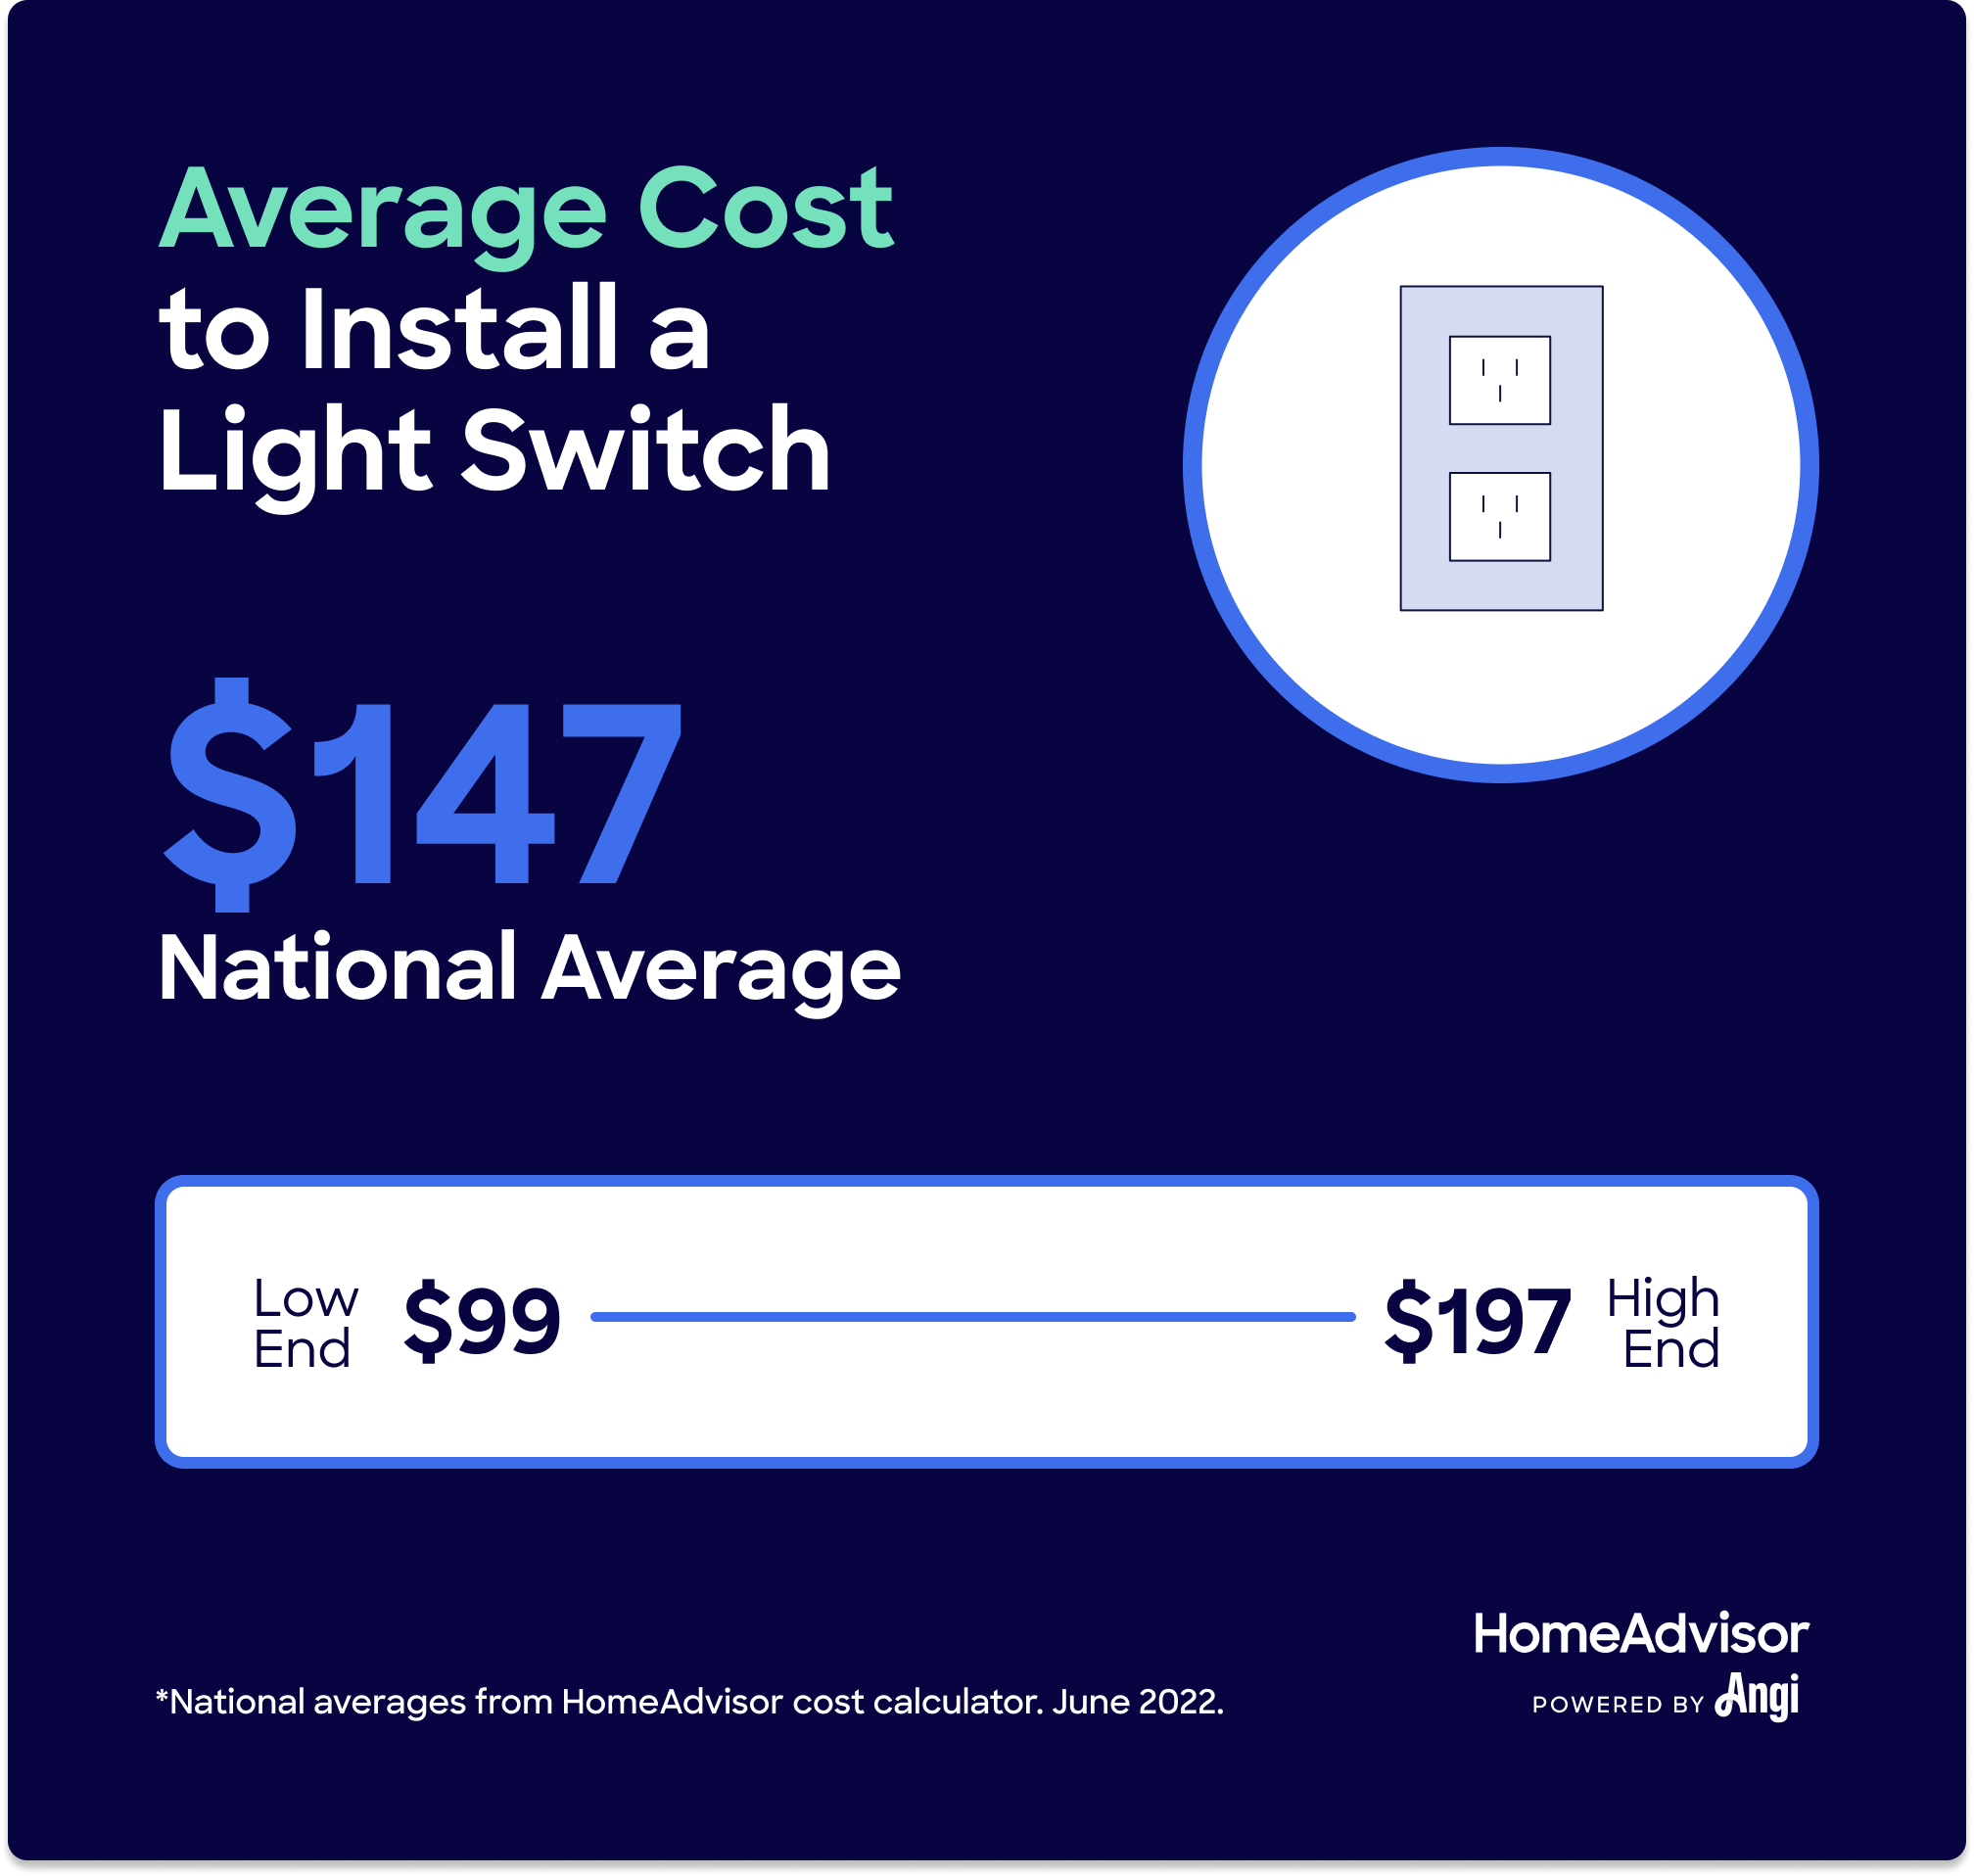 What's the Average Cost to Install a Light Switch?